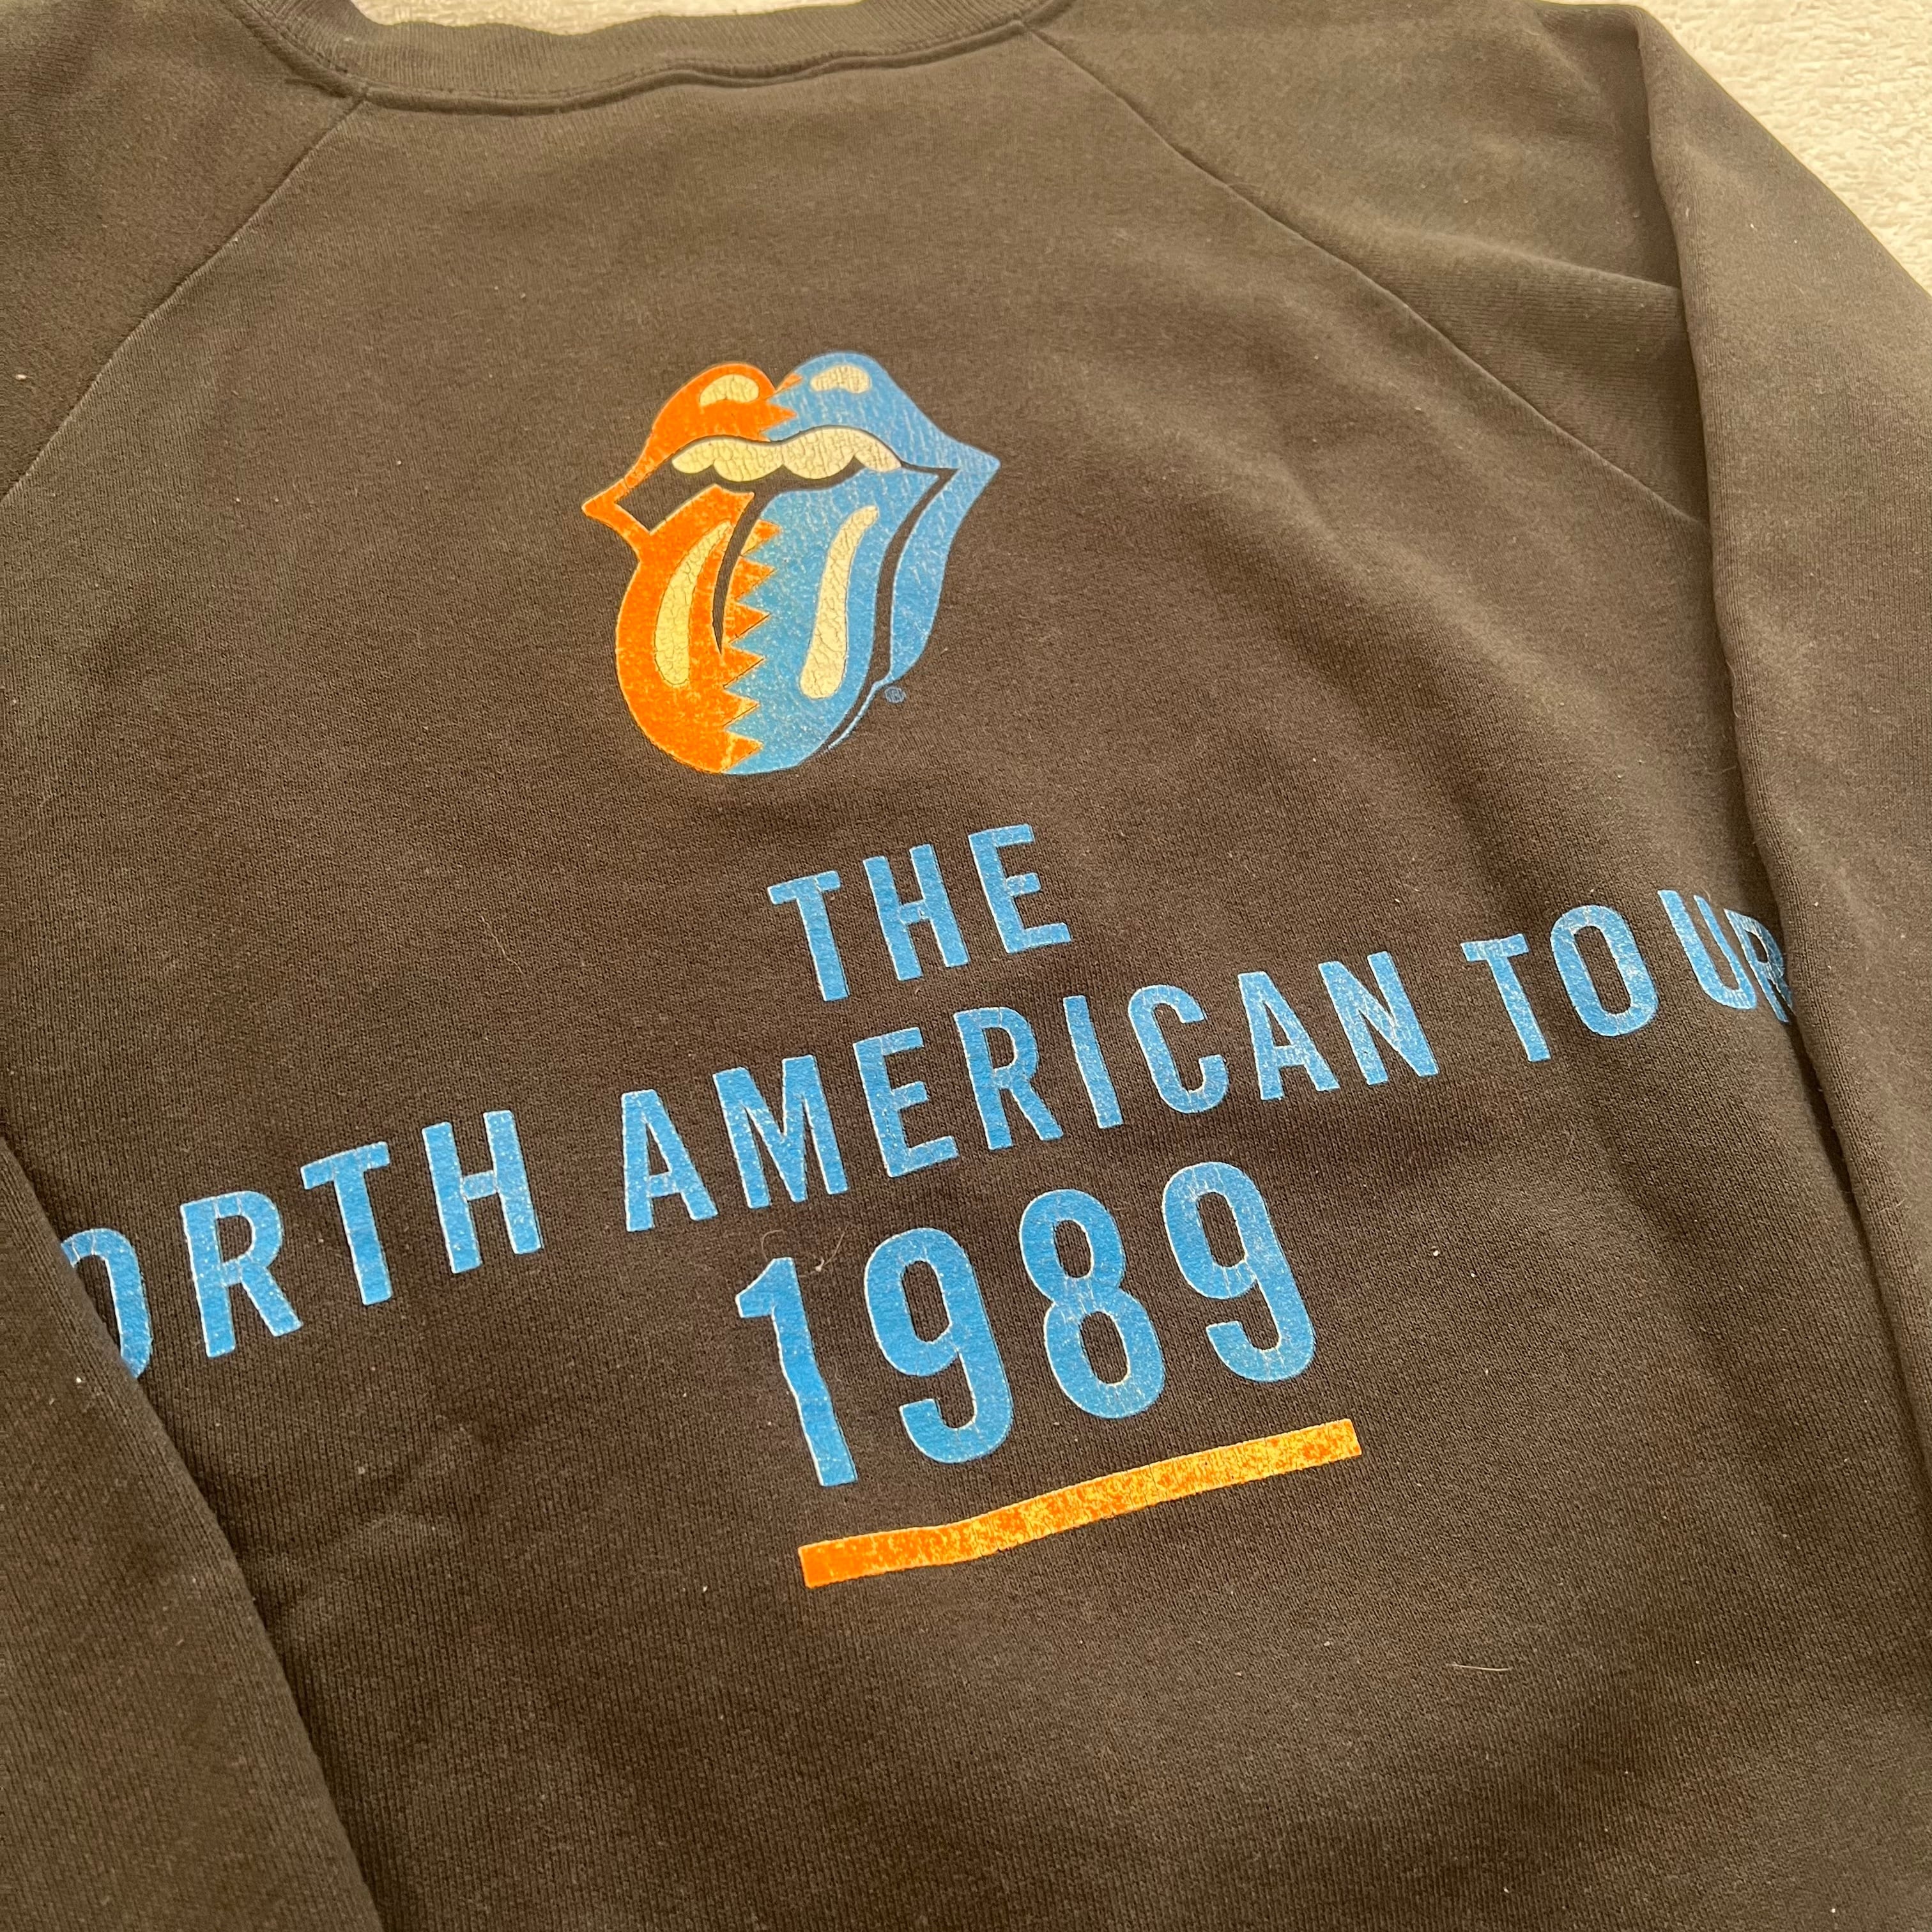 80s ROLLING STONES ローリングストーンズ THE NORTH AMERICAN TOUR